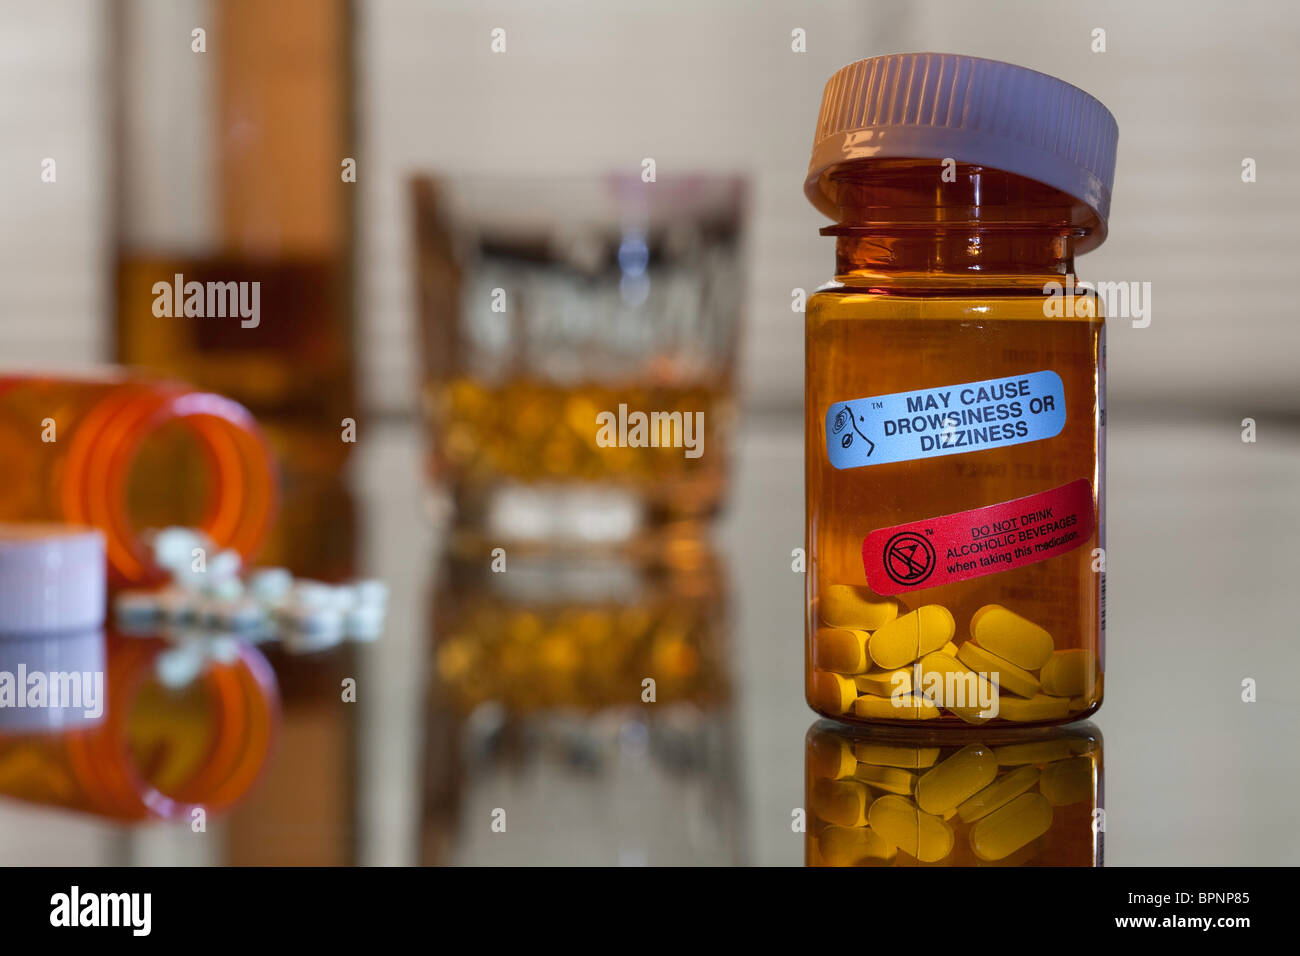 Drugs and Alcohol Abuse Still life Stock Photo